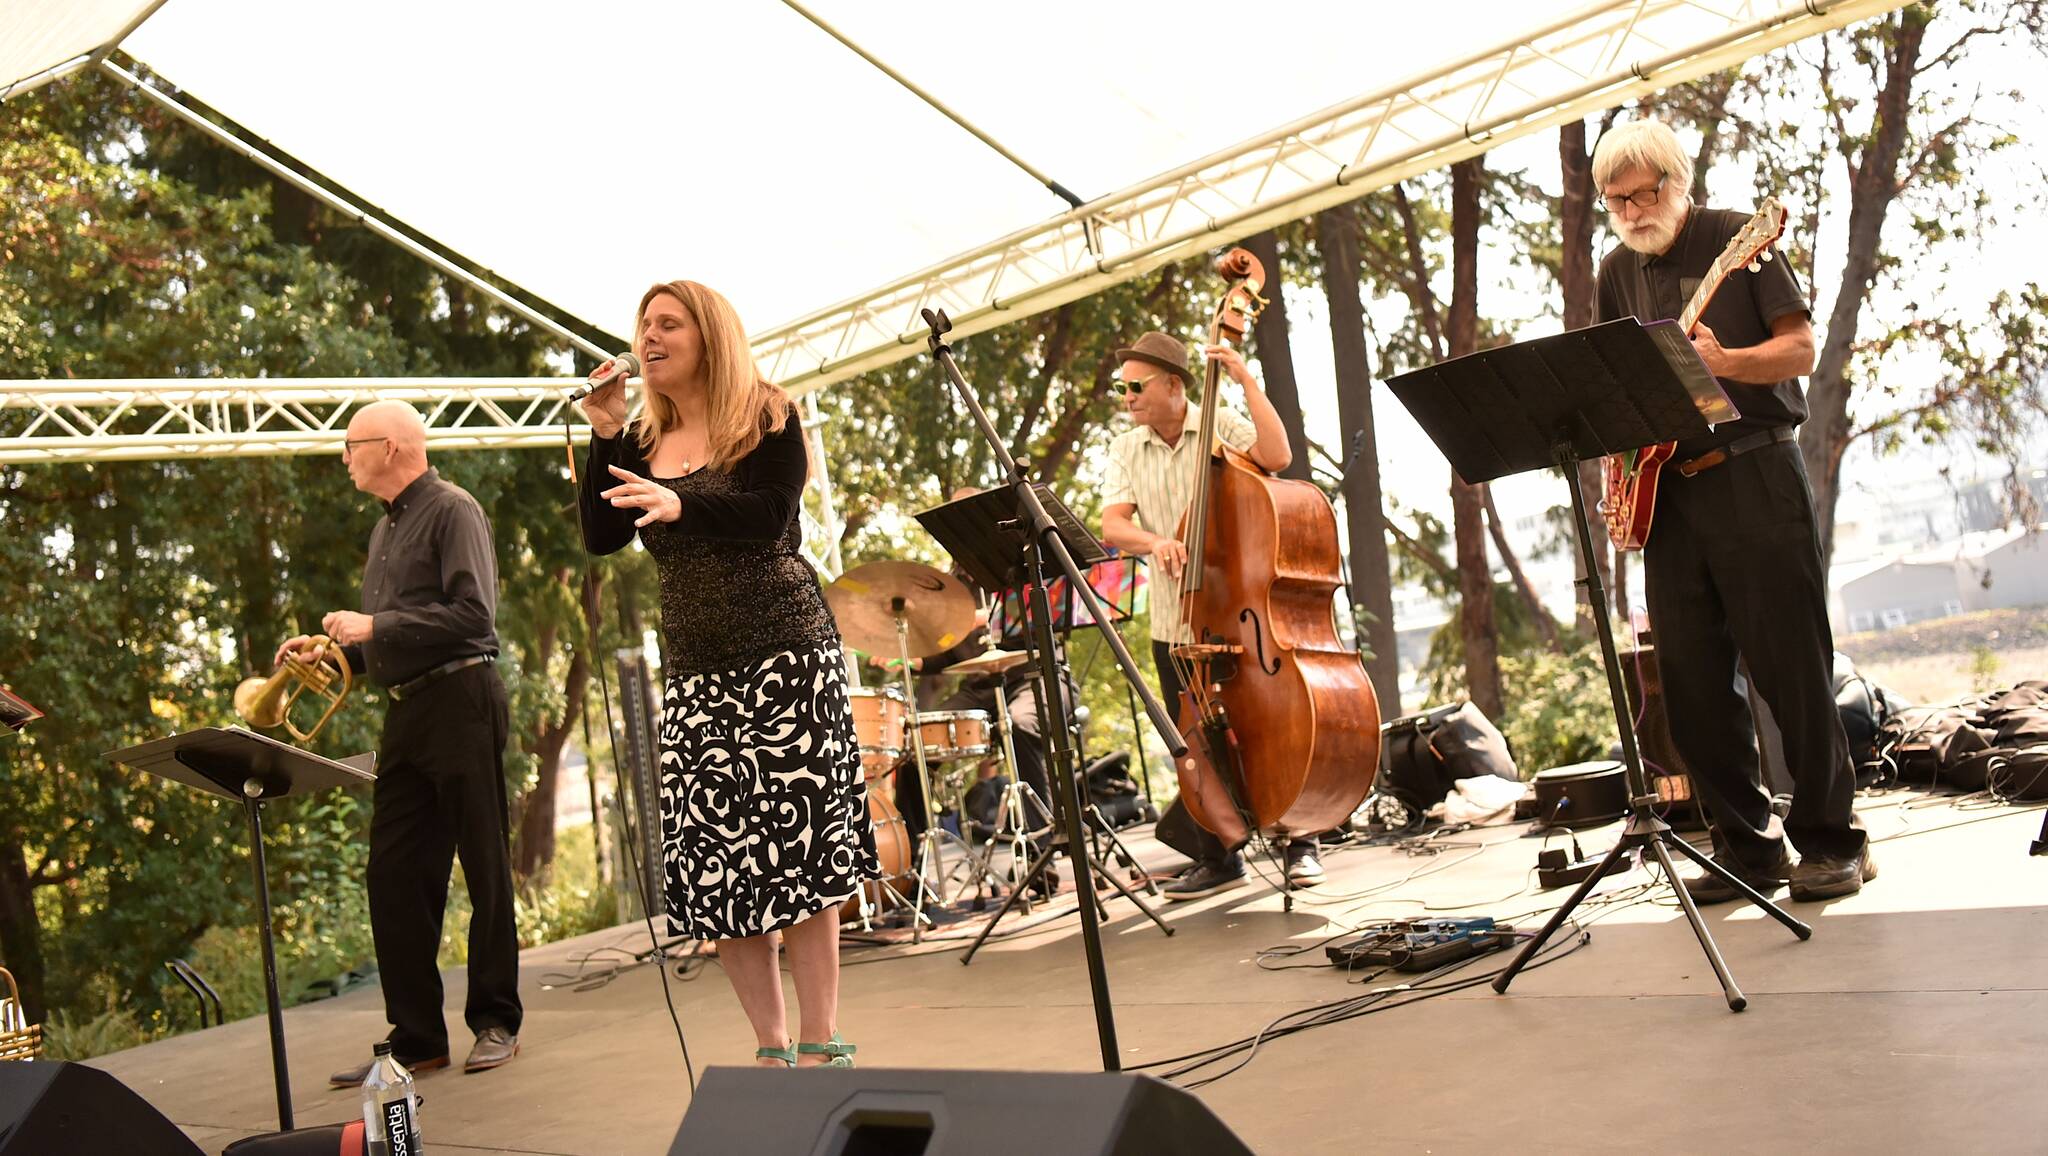 The Jenny Davis Jazz Quintet performs on stage at the Bridge Festival in Waterfront Park in Winslow.